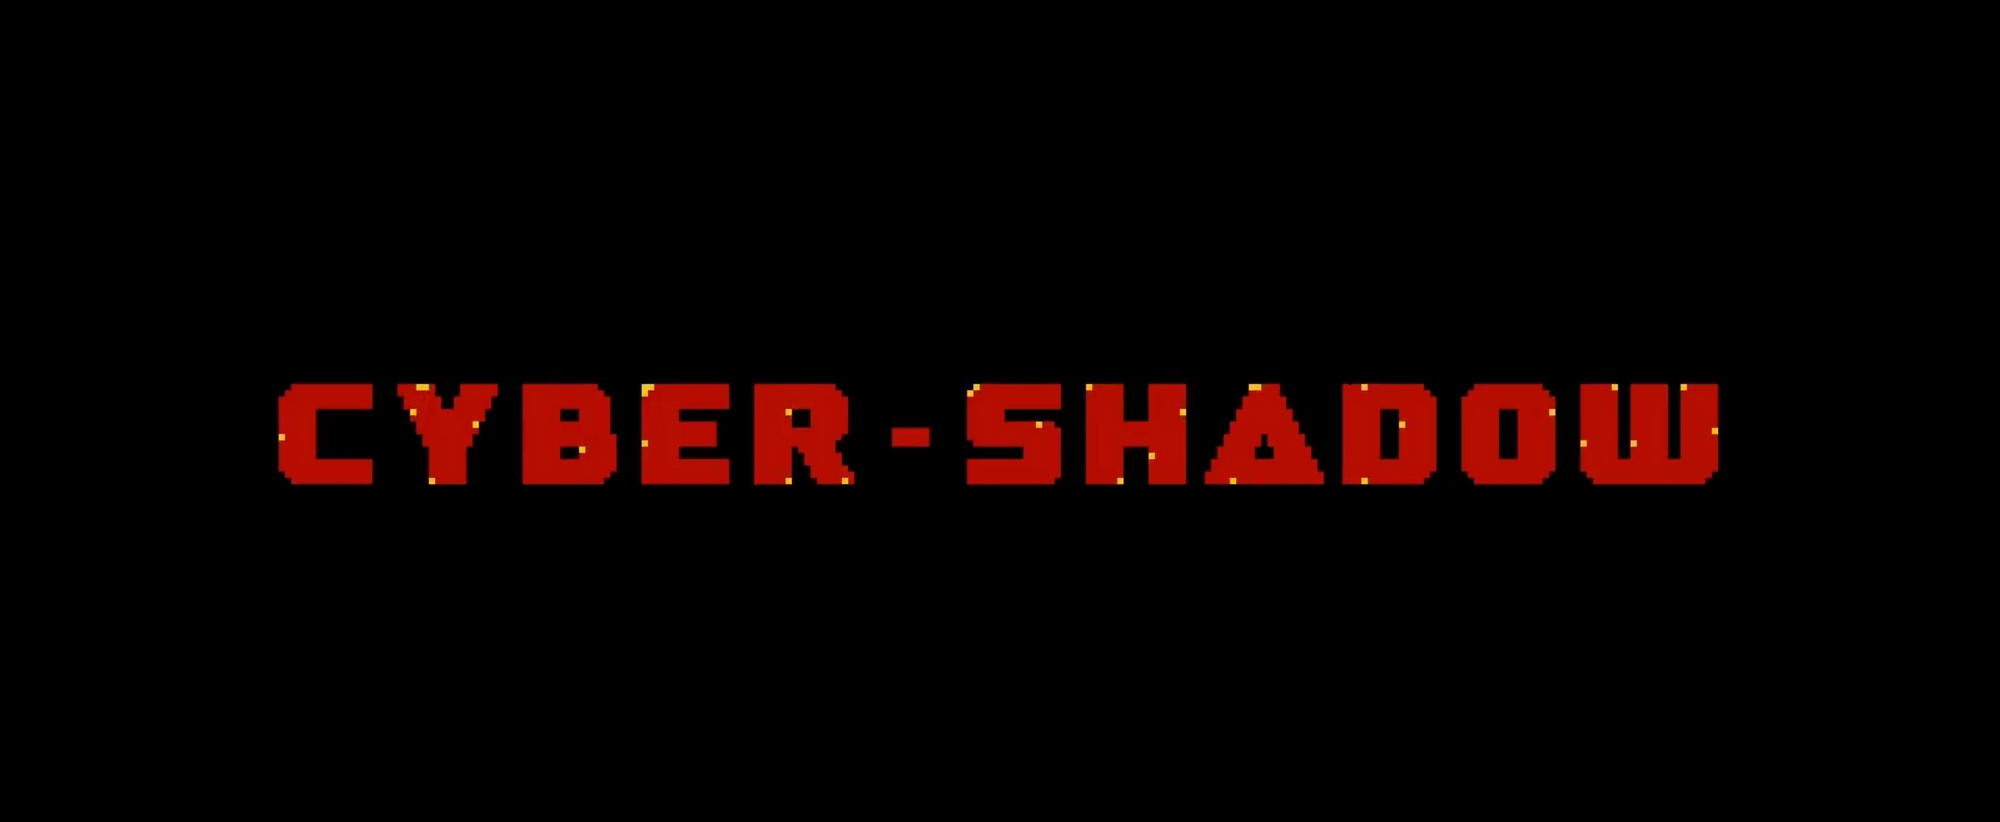 Mechanical Head Studios and Yacht Club Games are Bringing Cyber Shadow to Nintendo Switch